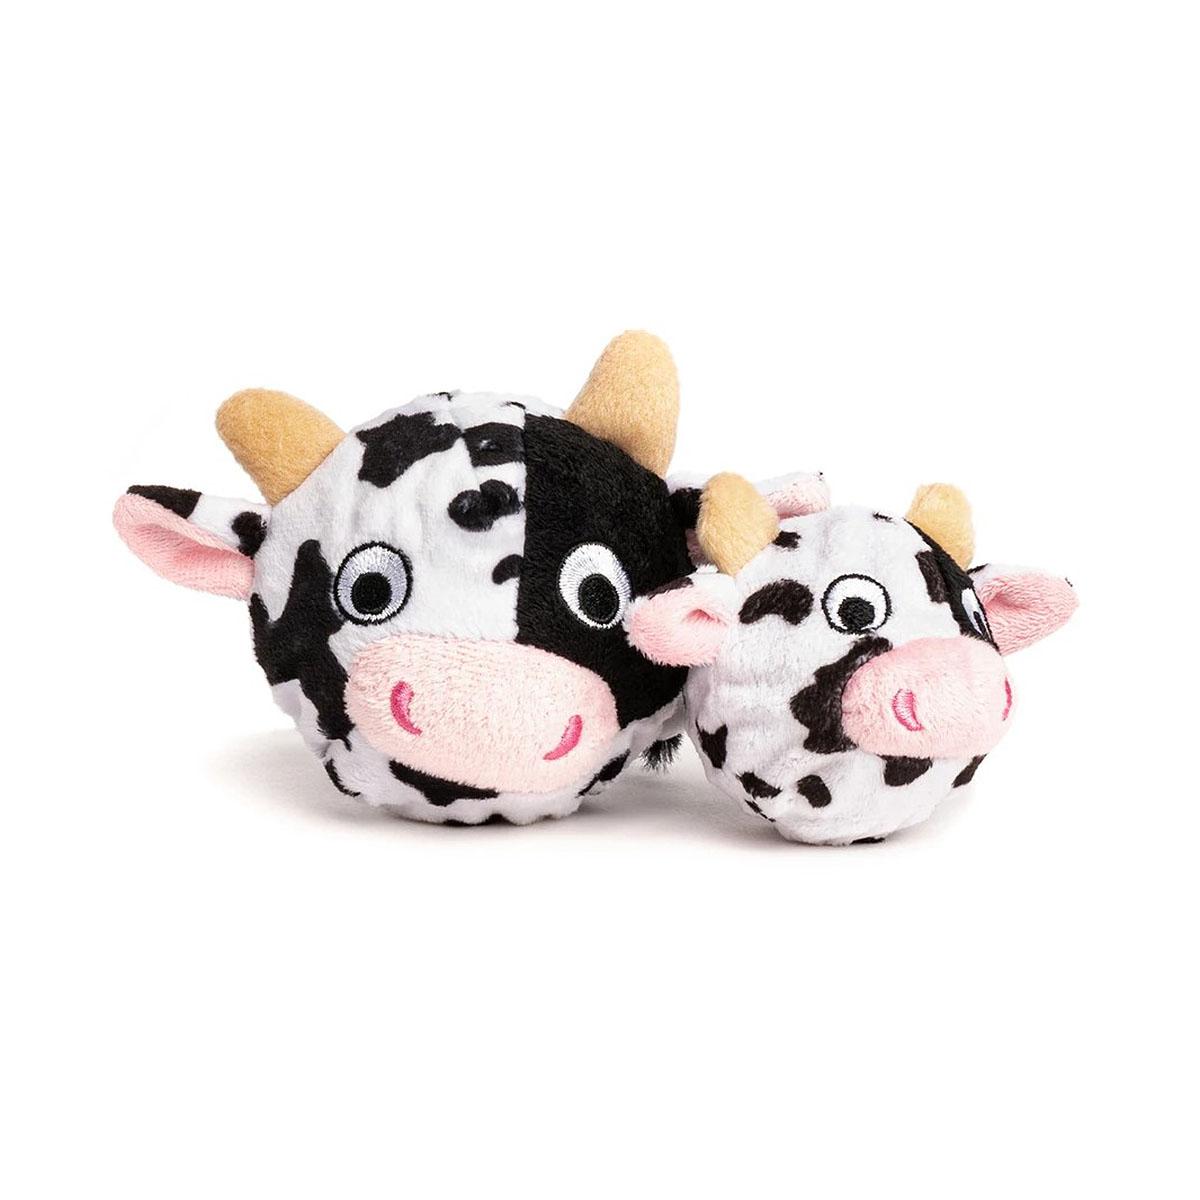 fabdog® Country Critter faball® Dog Toy - Cow